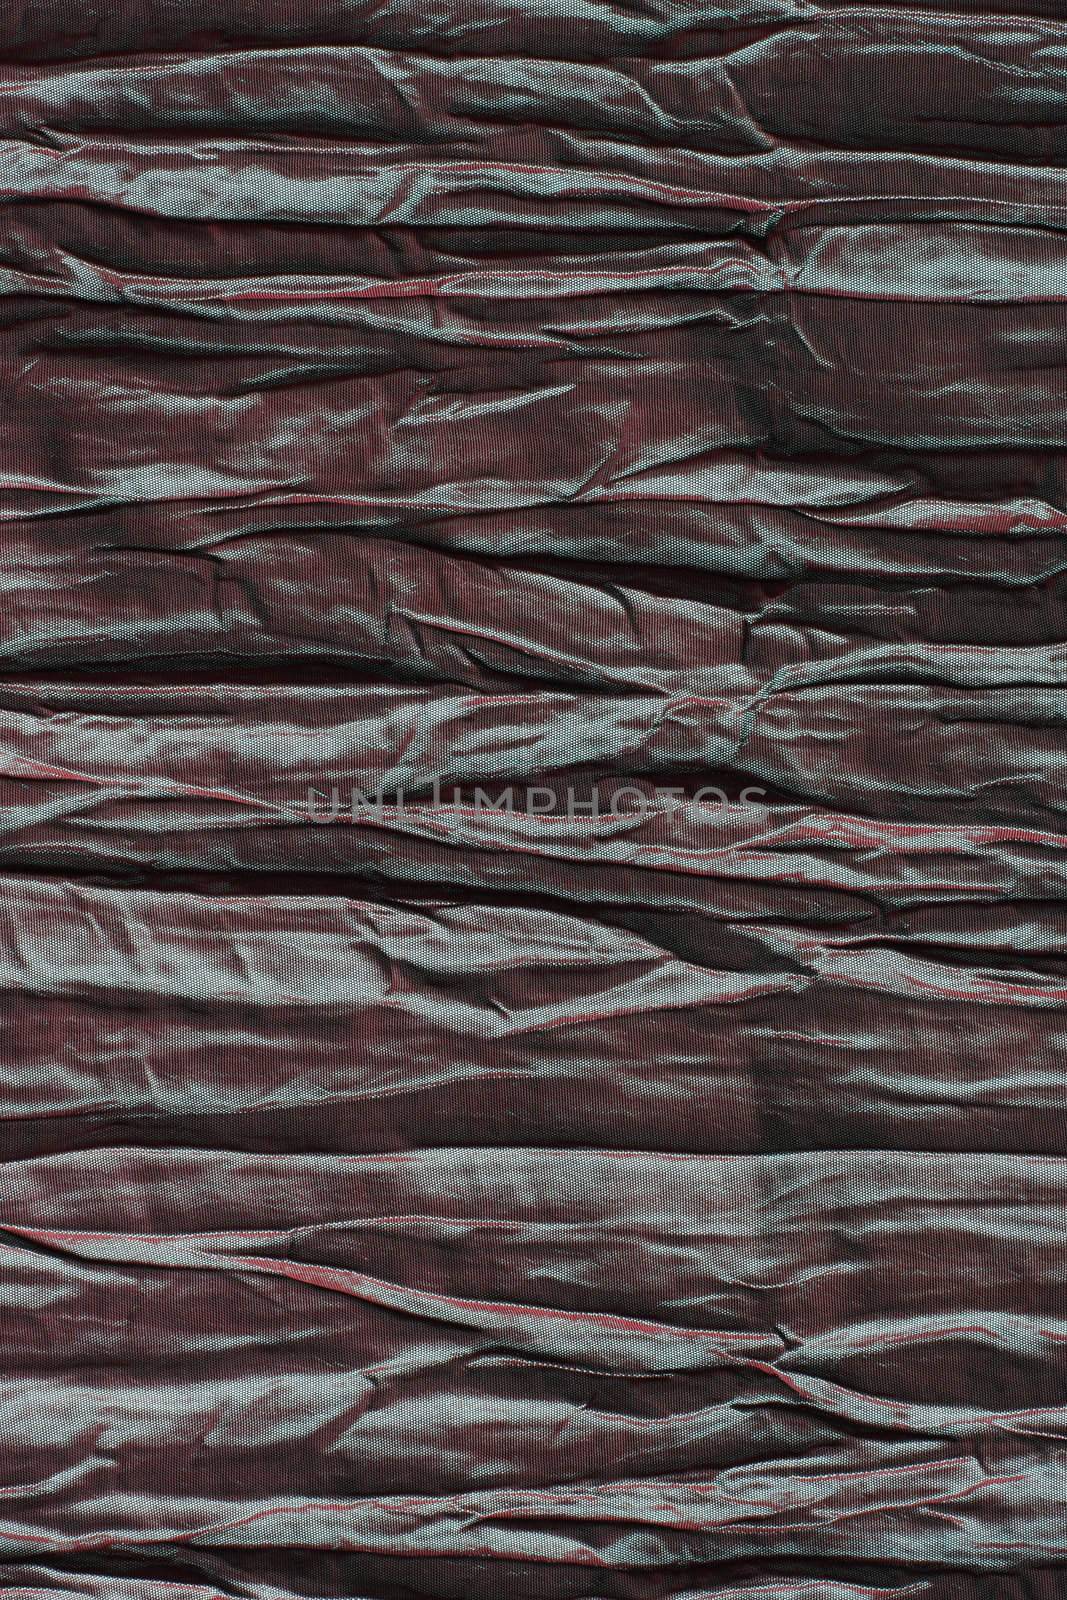 frame filling shot of threaded fabric, metalic look to it, Fabric is supposed to be wrinkly 